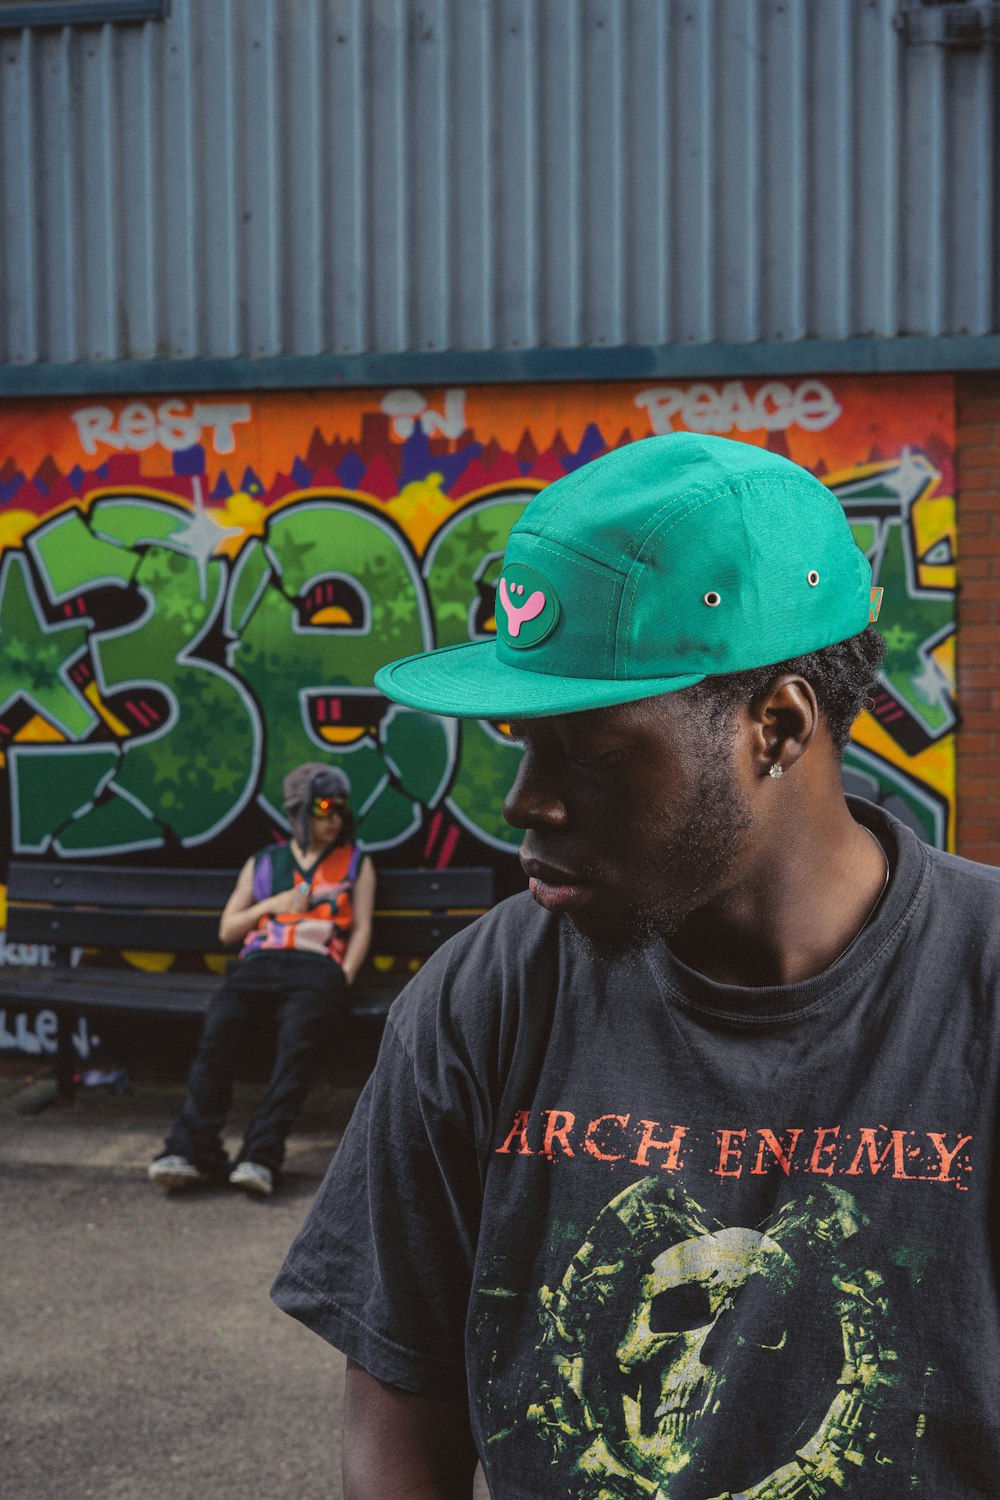 a man wearing a green hat standing in front of a graffiti covered wall